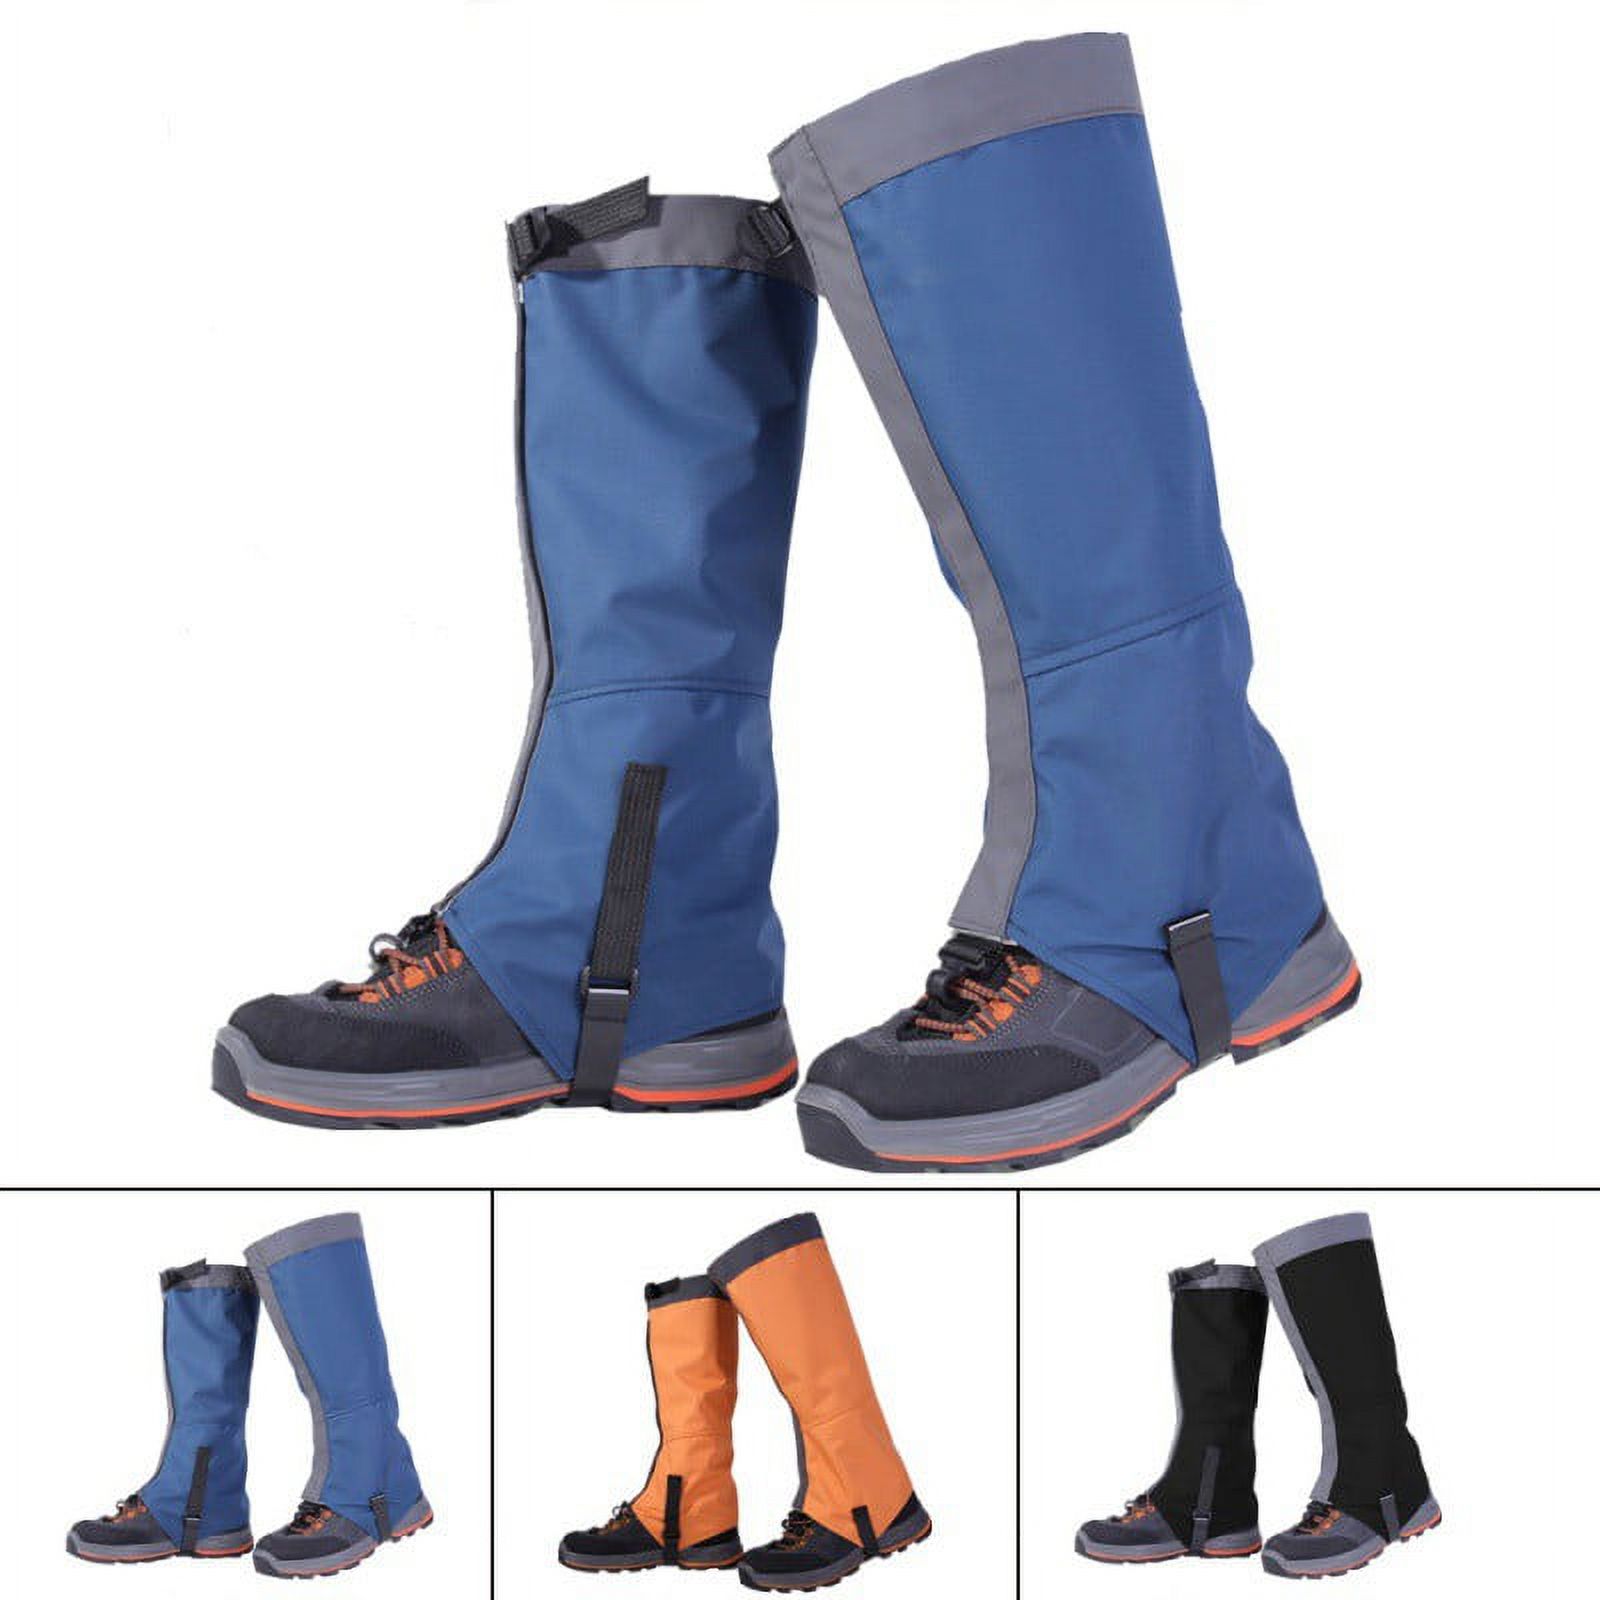 Outdoor Mountain Hiking Hunting Boot Gaiters Waterproof Snow Snake High Leg Shoes Cover - image 2 of 9